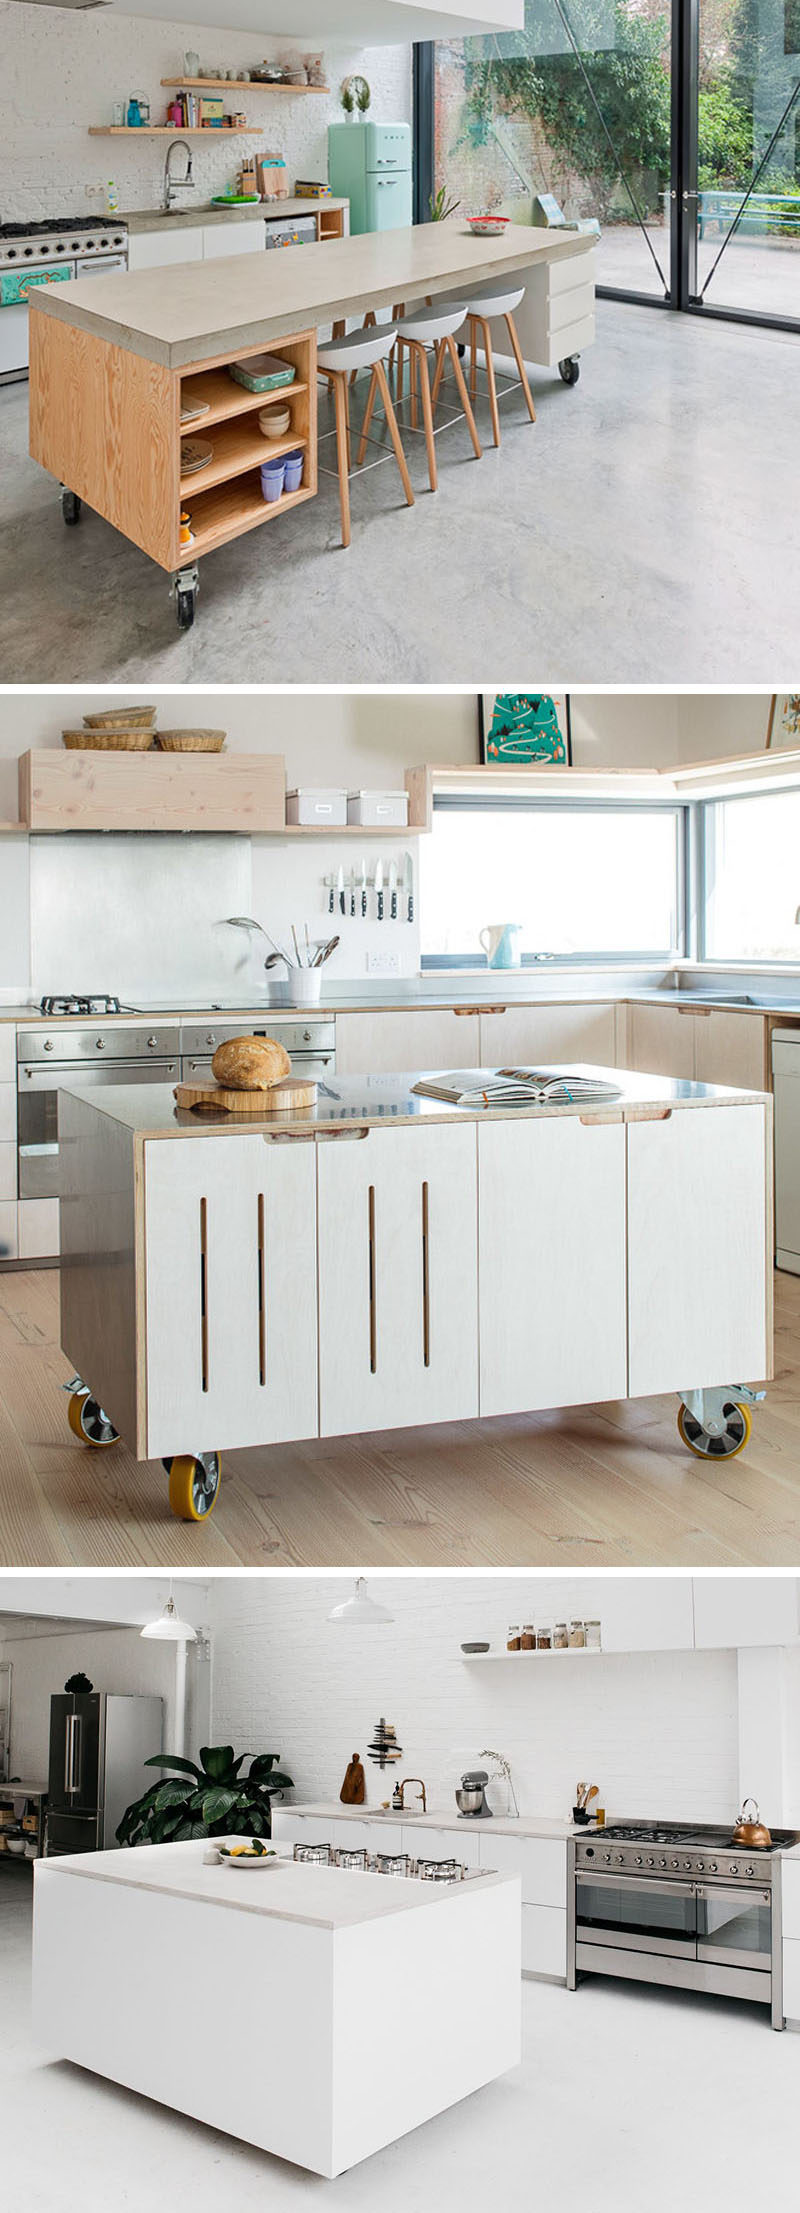 movable-kitchen-island-with-wheels-100317-1114-02-800x2213